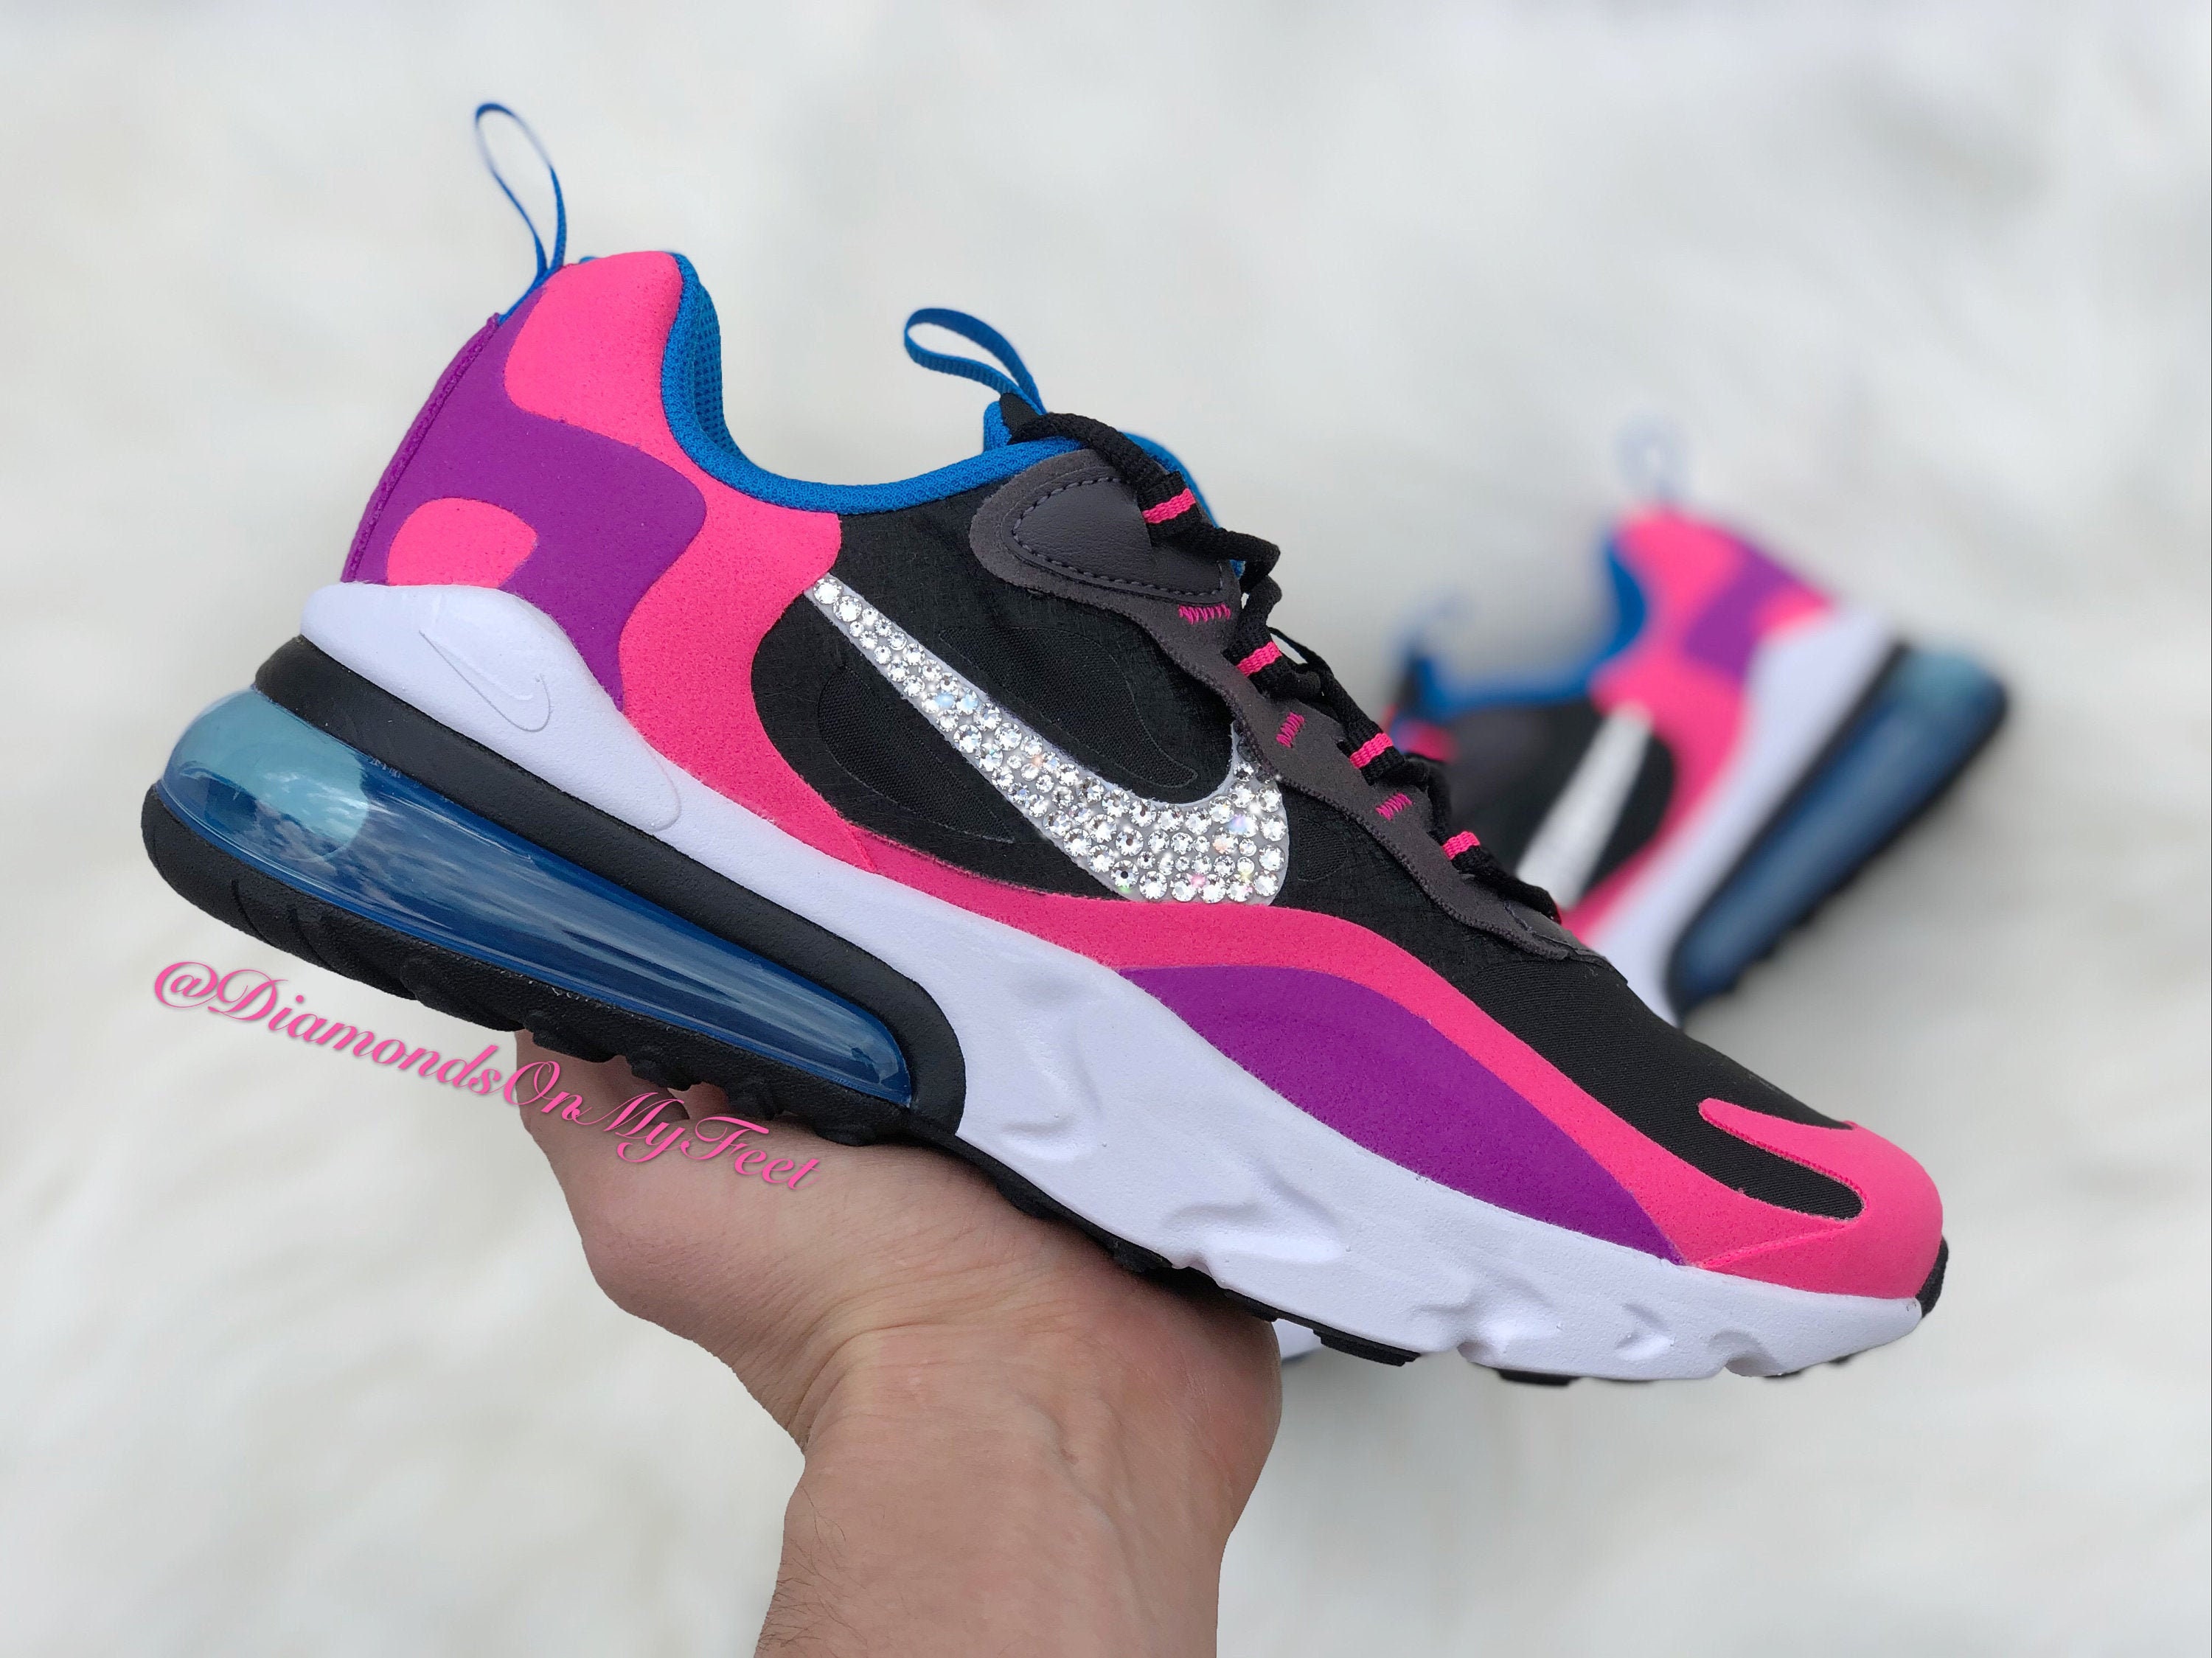 Nike Air Max 270 React Shoes Size 6Y Women's Size 7.5 White Pink